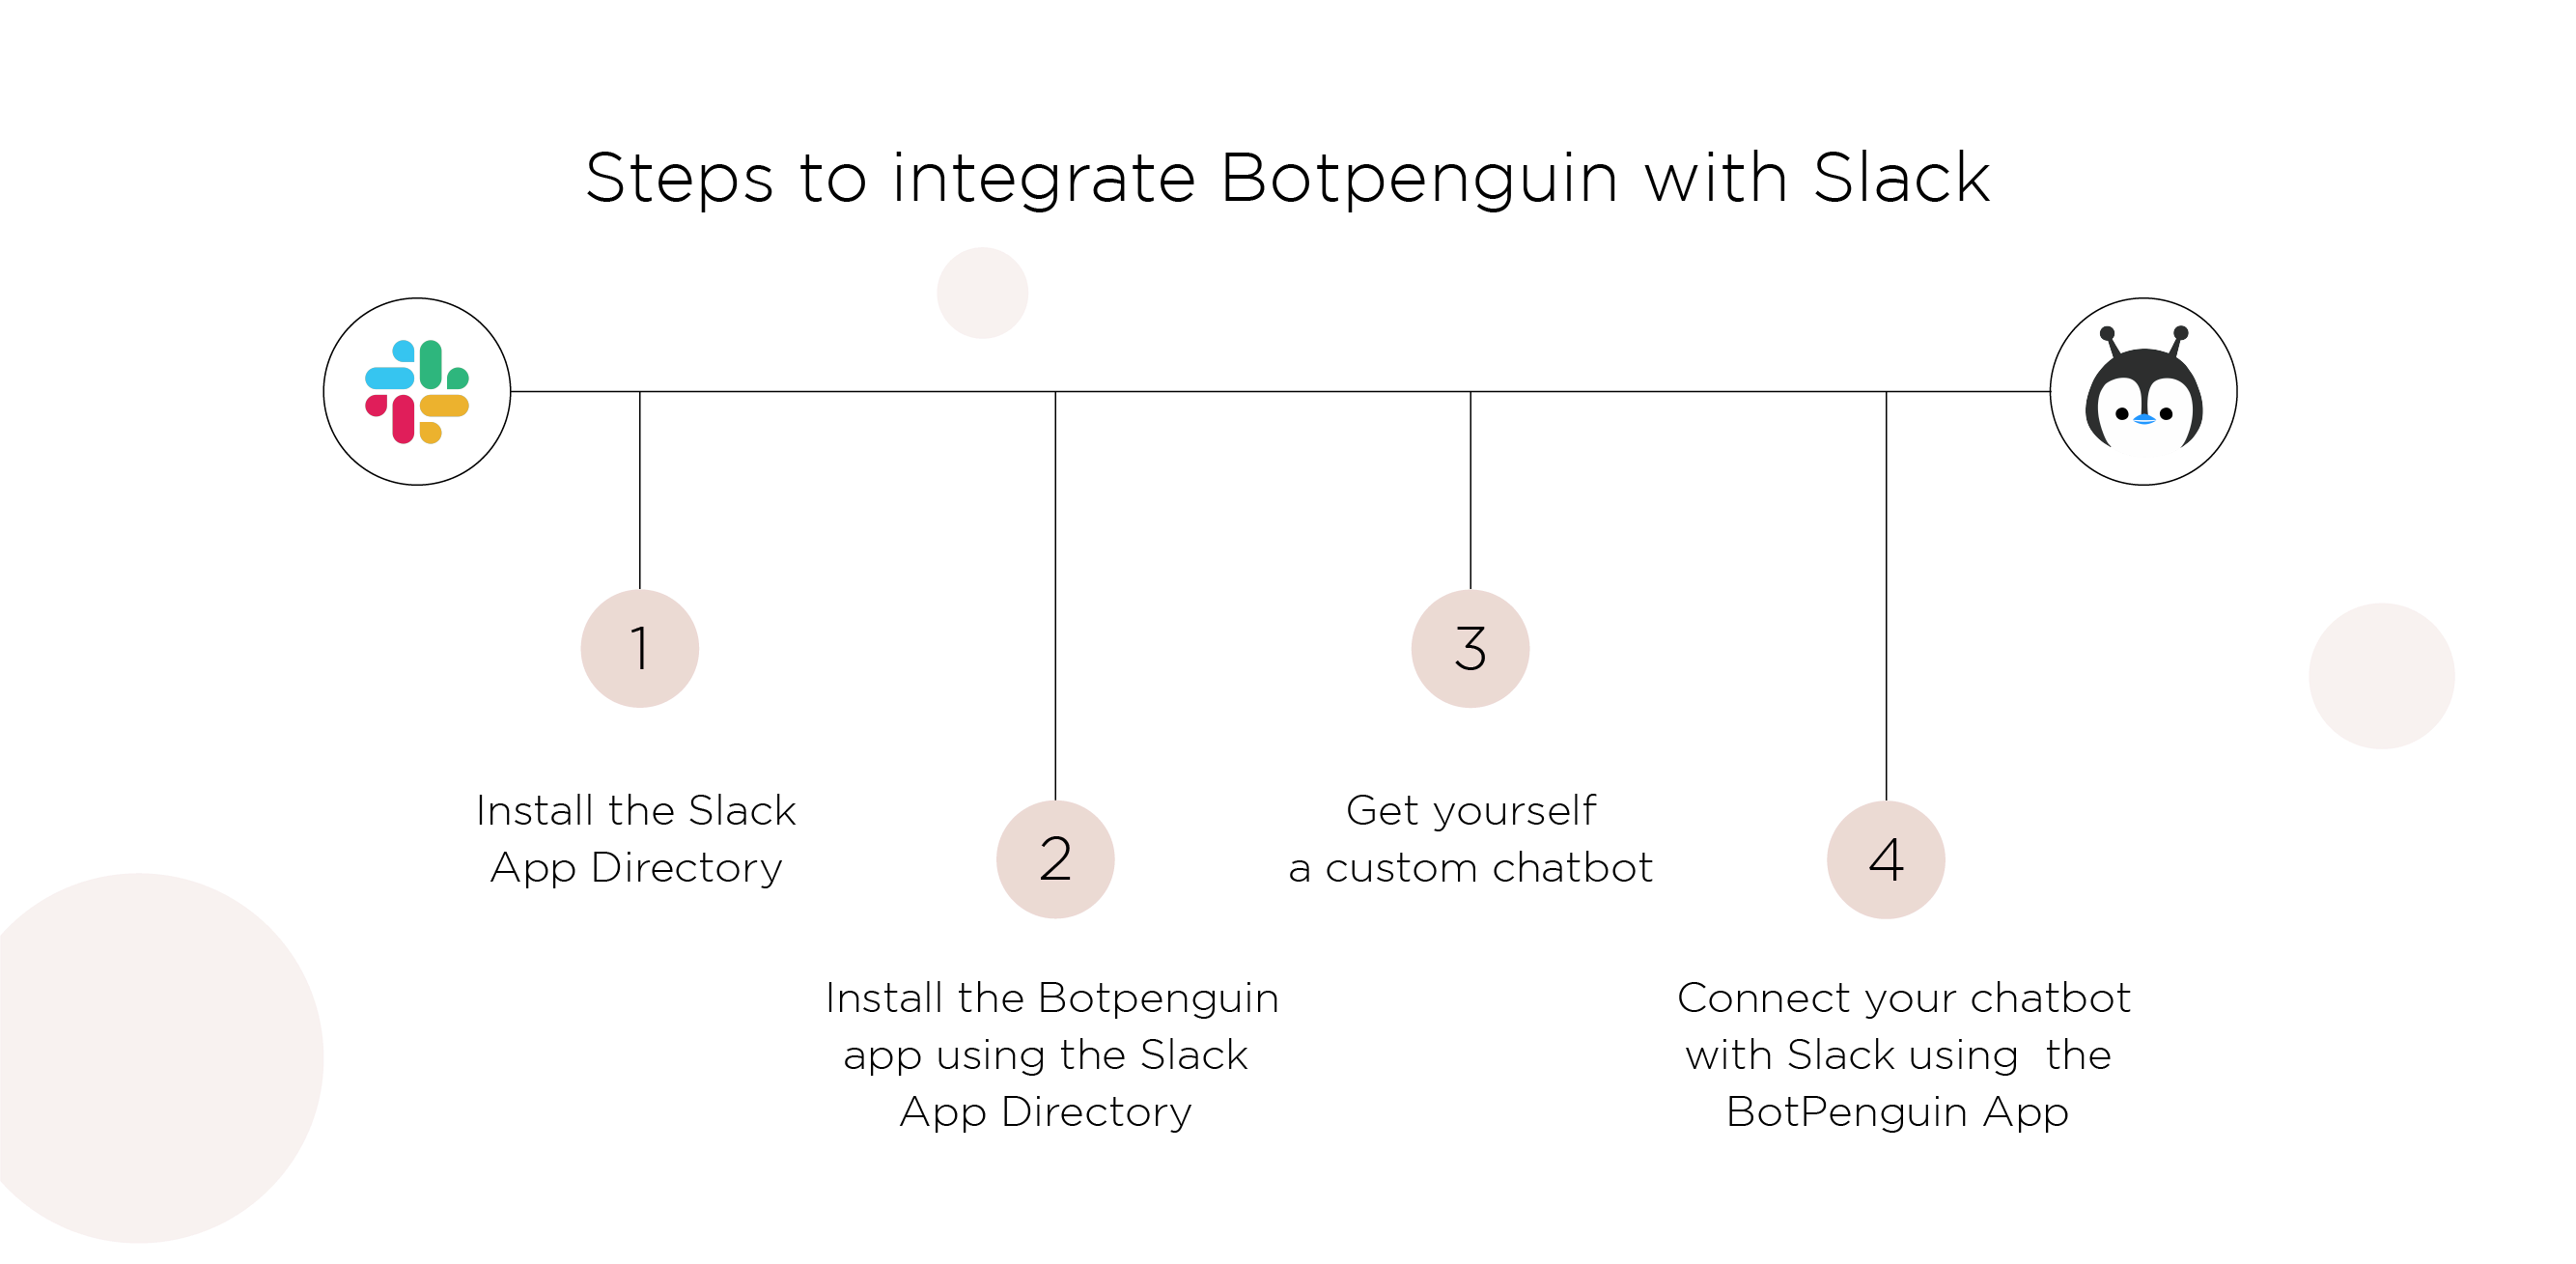 How to integrate Botpenguin with Slack?